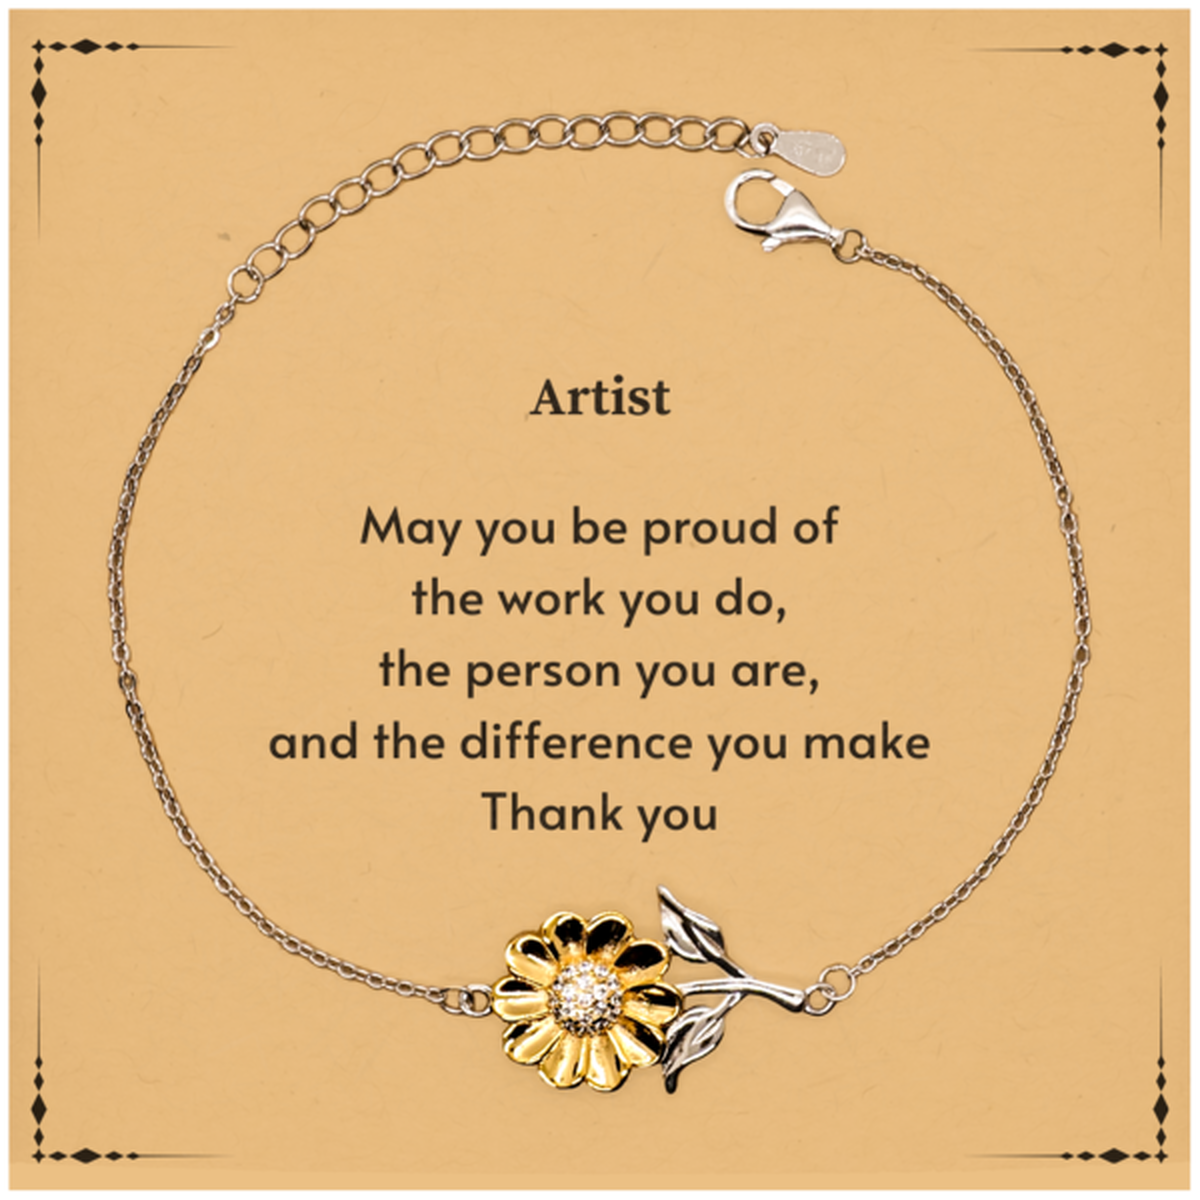 Heartwarming Sunflower Bracelet Retirement Coworkers Gifts for Artist, Artist May You be proud of the work you do, the person you are Gifts for Boss Men Women Friends